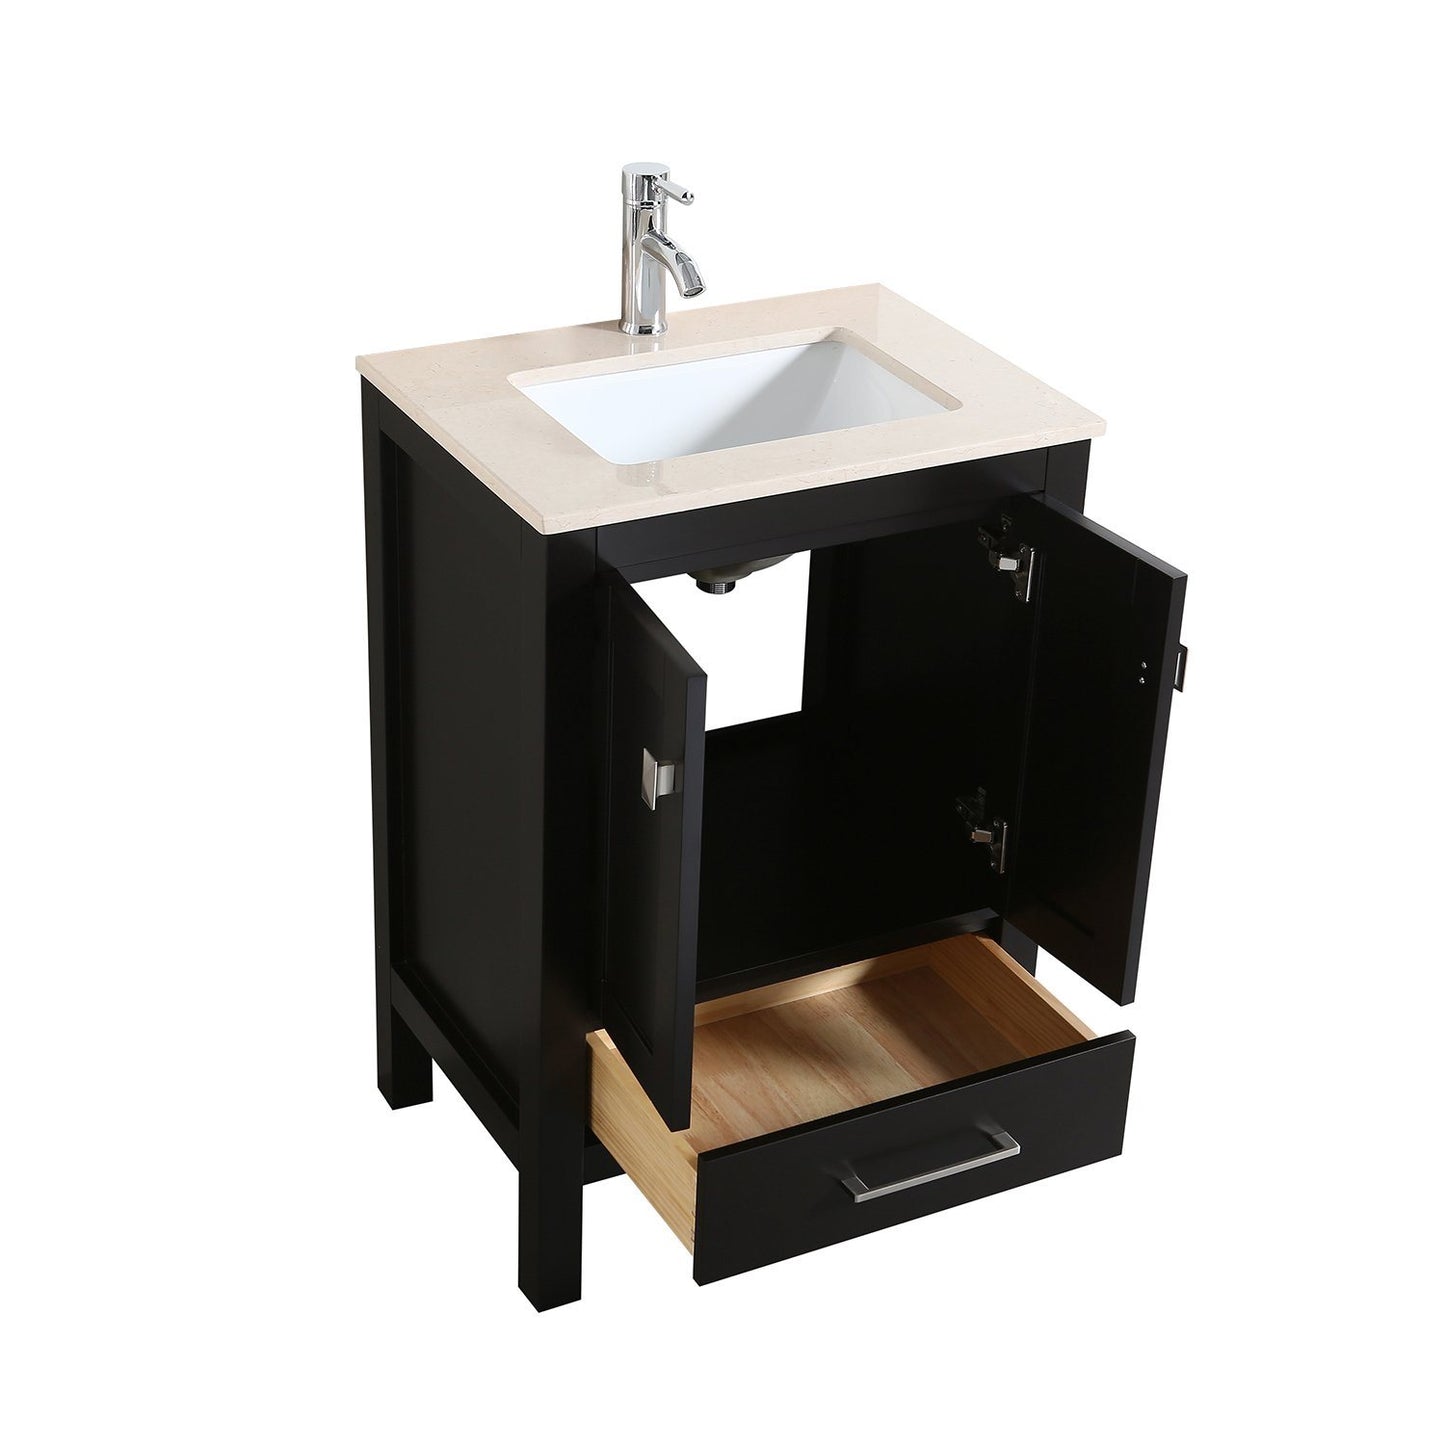 Eviva London 30" Transitional Espresso bathroom vanity with white Carrara marble countertop - Luxe Bathroom Vanities Luxury Bathroom Fixtures Bathroom Furniture